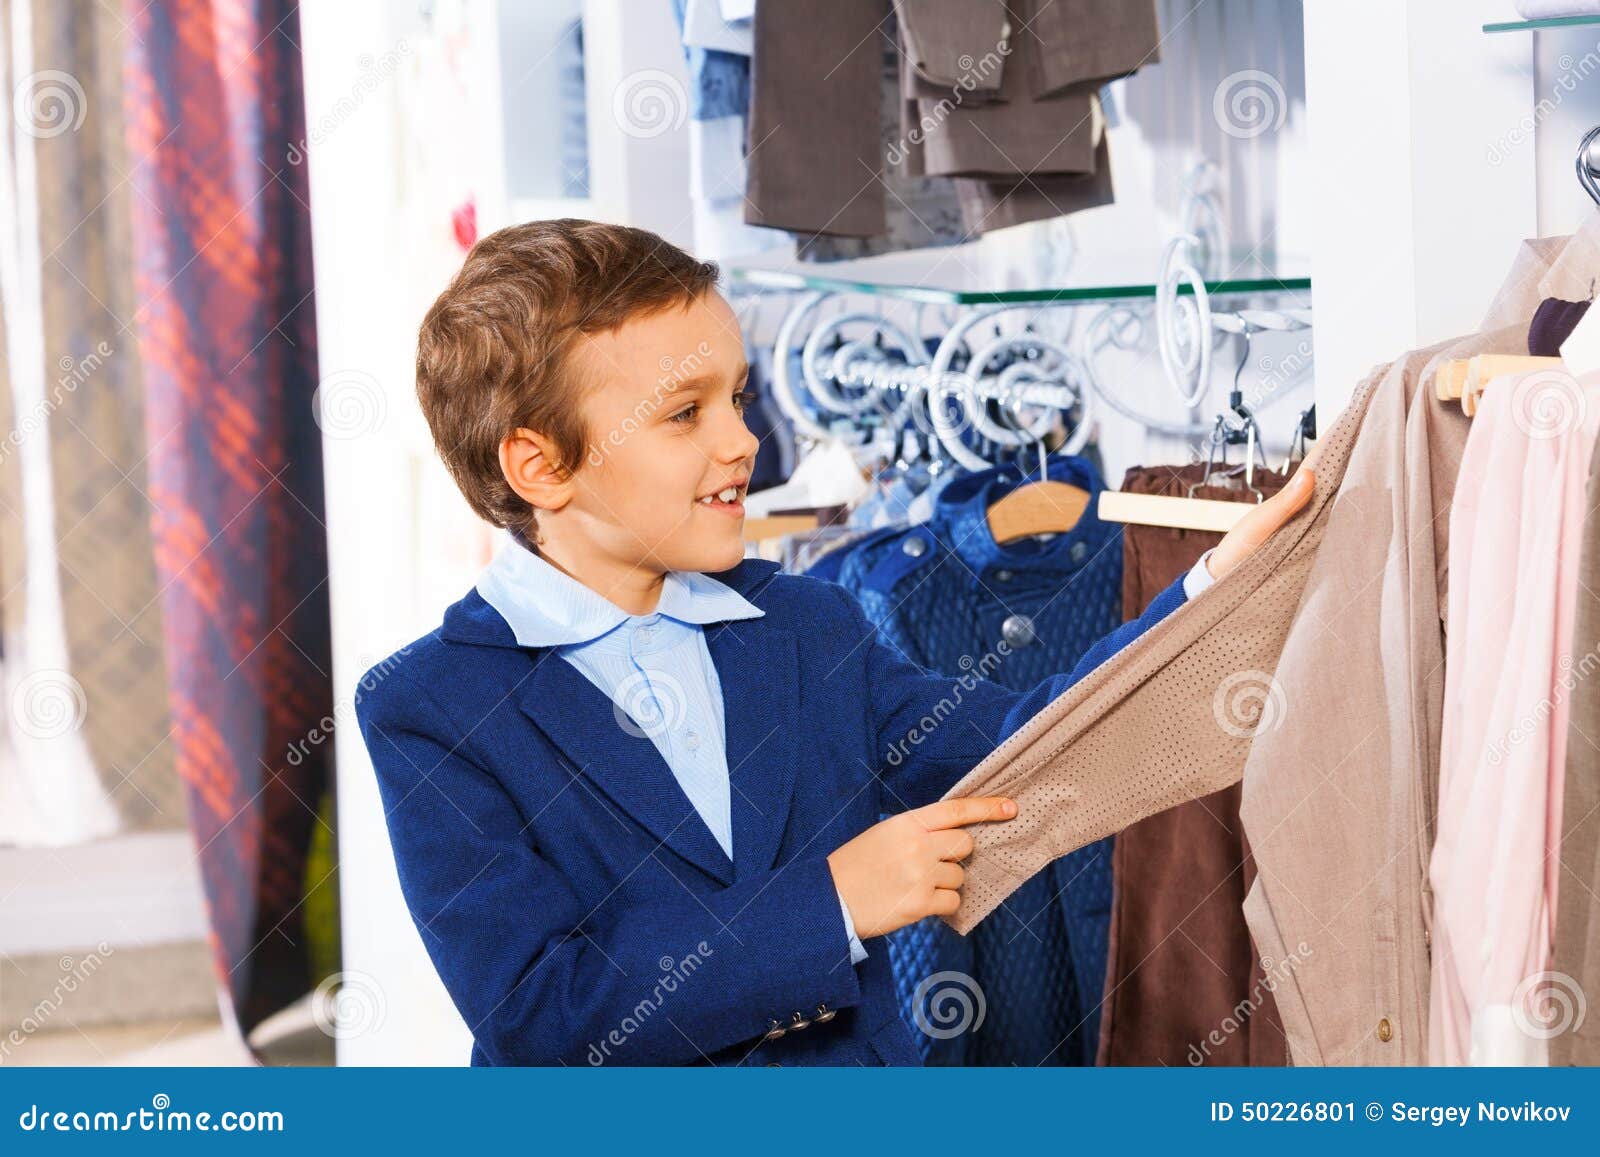 Cute Smiling Boy Stands Near Clothes and Choosing Stock Image - Image ...